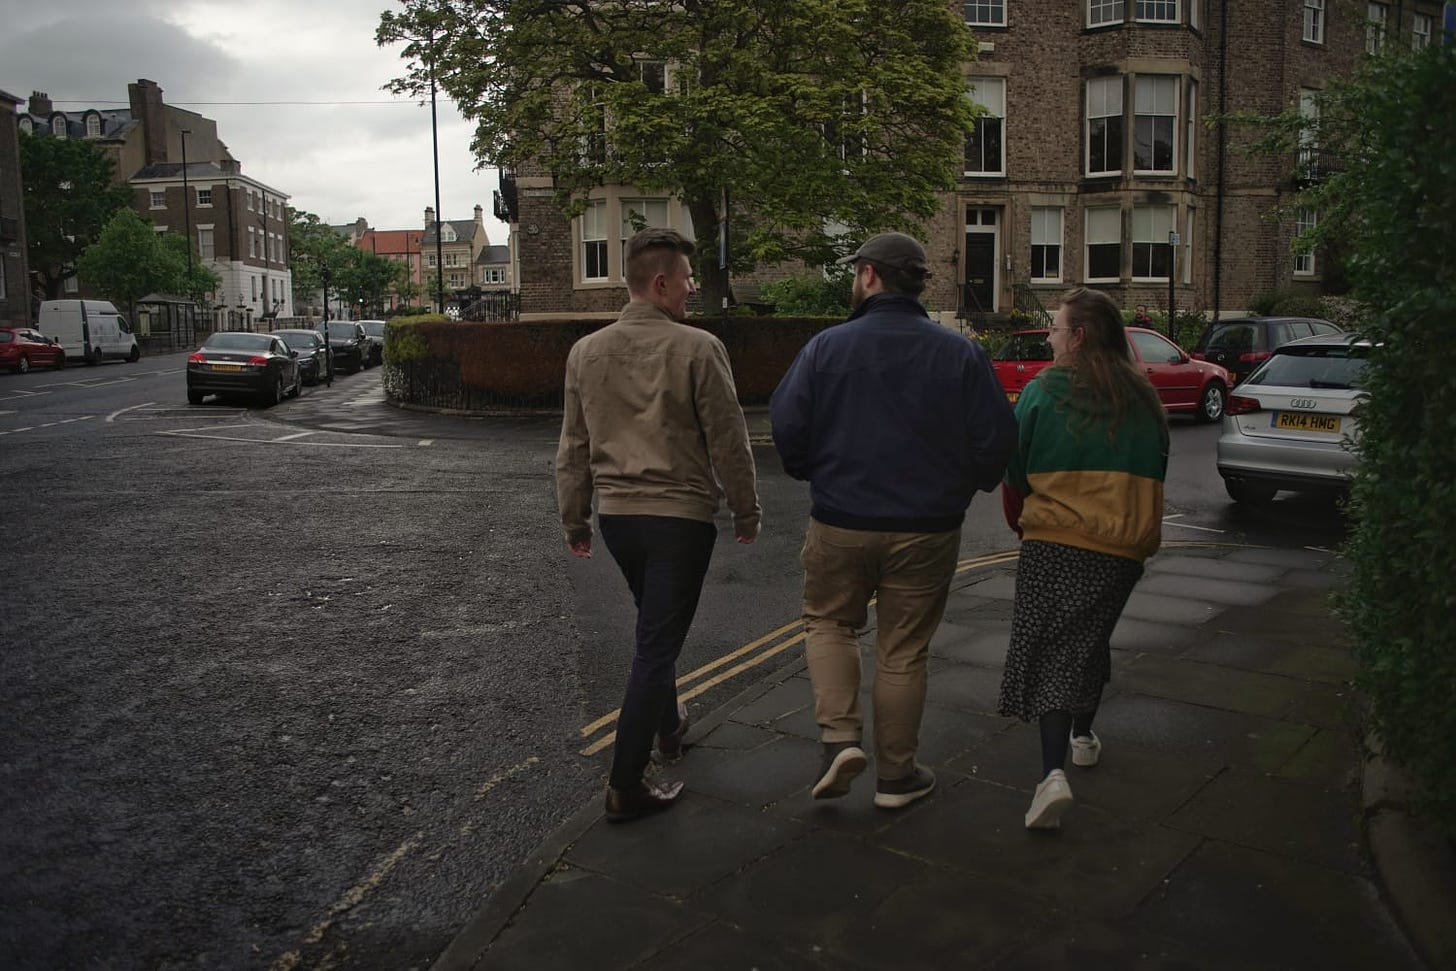 The EXIT Press team in 2022. On the left is Christian, a white man with dirty blonde/brown hair, in a tan jacket. In the middle is Kieran, a white non-binary person wearing a cap and a blue jacket. On the end is Eve, a white woman with brown hair wearing a green and yellow jacket. They are walking around the corner of a road together. The vibe is that we're walking away to something else. Taking the EXIT, perhaps.